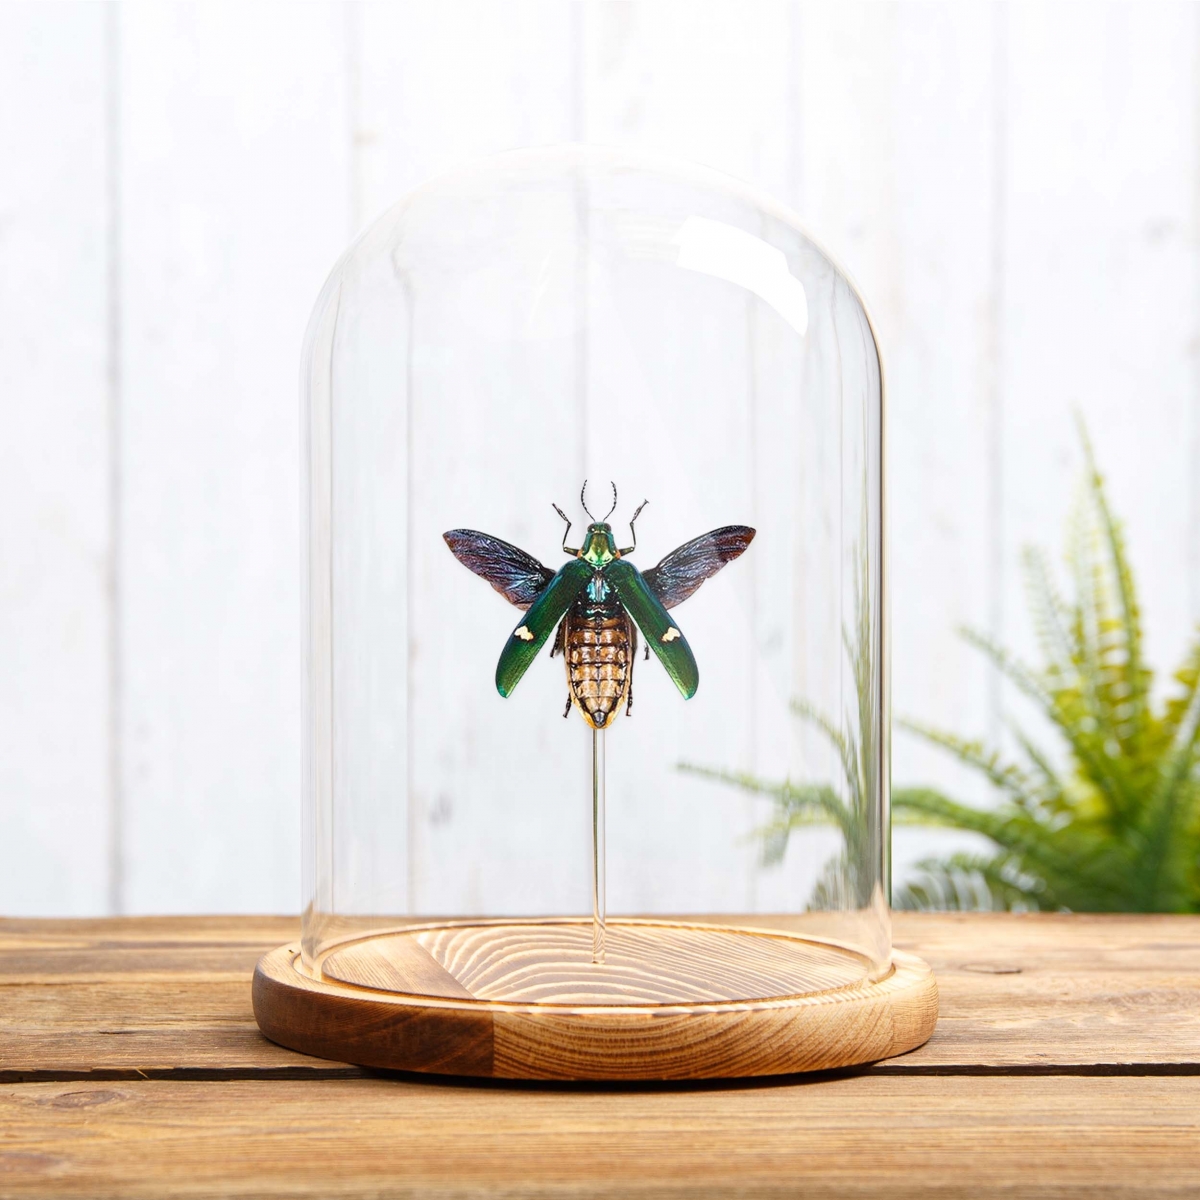 Metallic wood-boring Beetle in Glass Dome with Wooden Base (Megaloxantha bicolor)